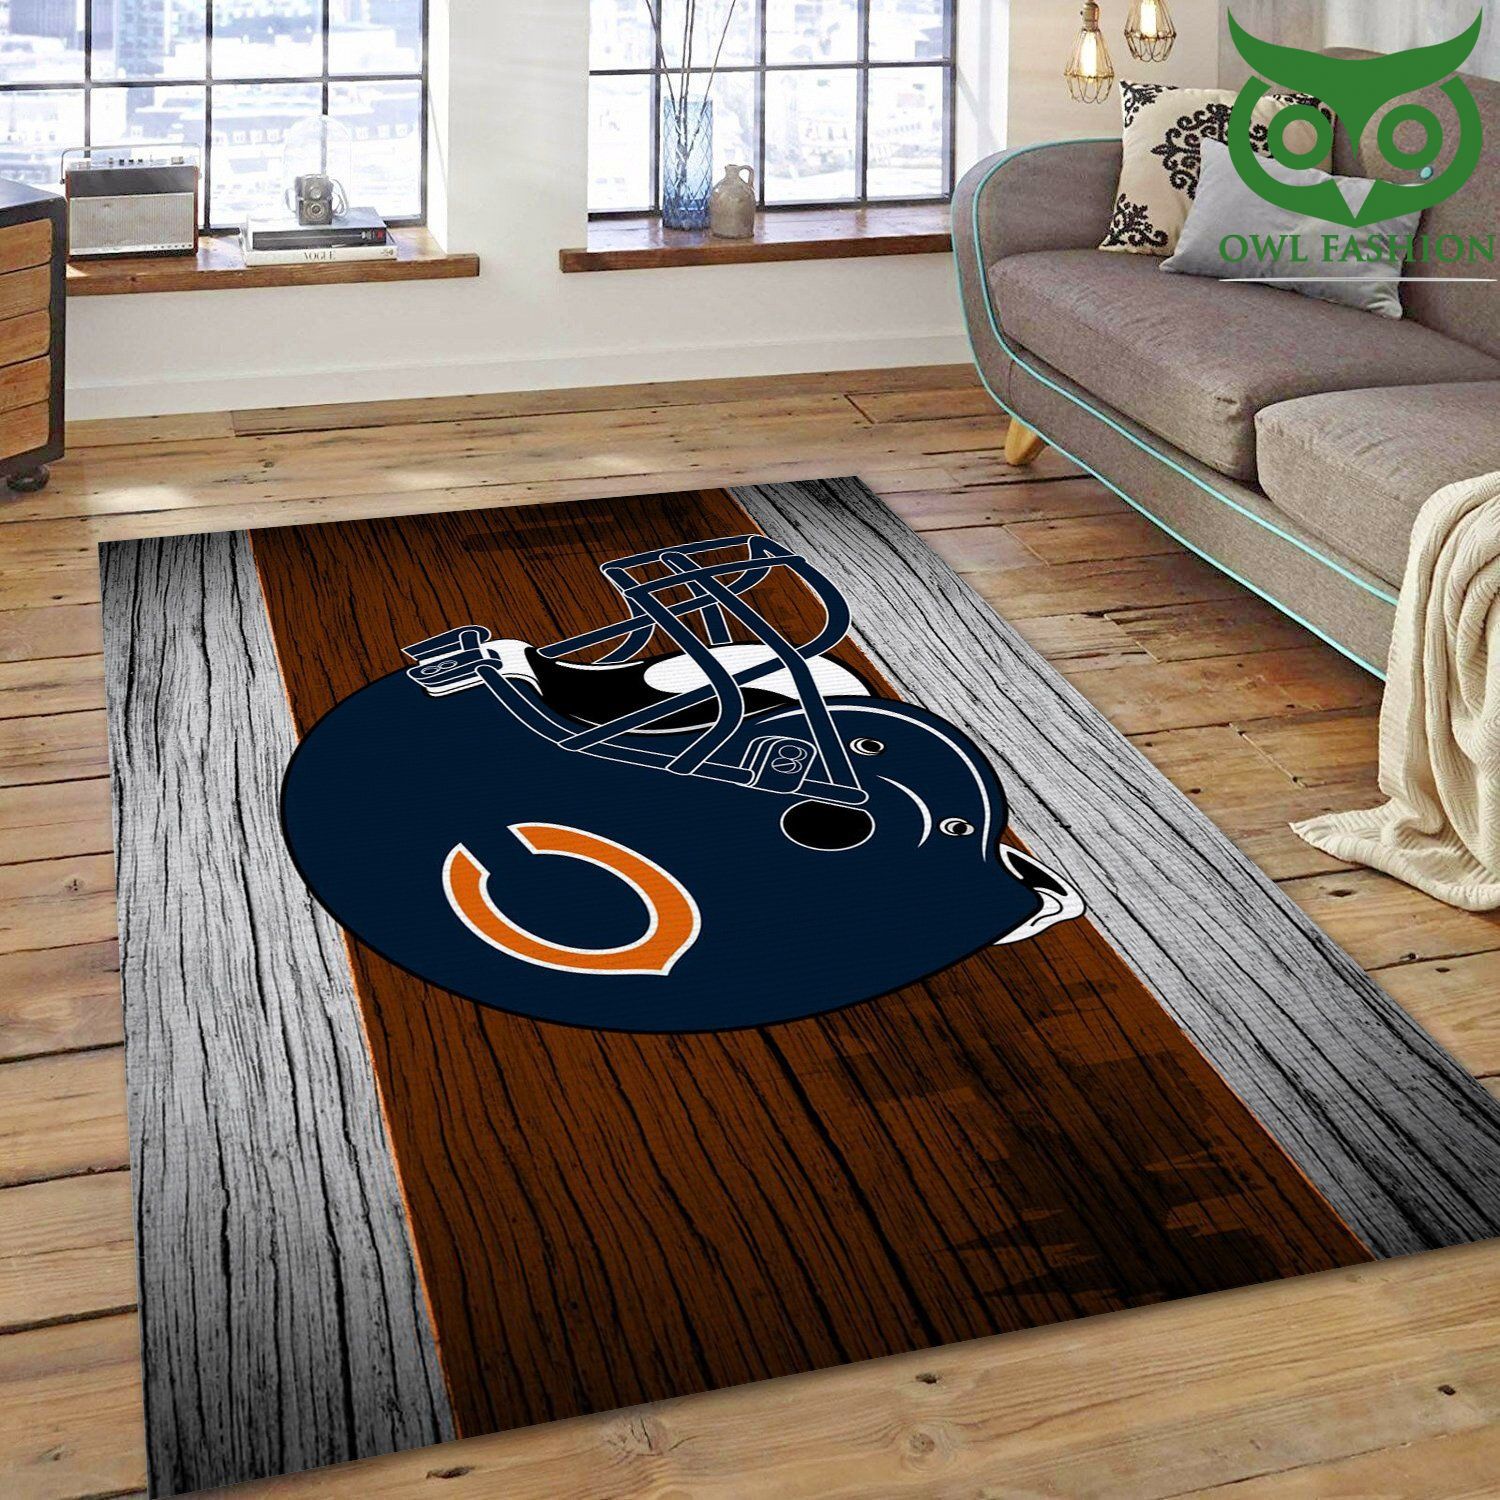 Chicago Bears Nfl Area carpet rug Home and floor Decoration